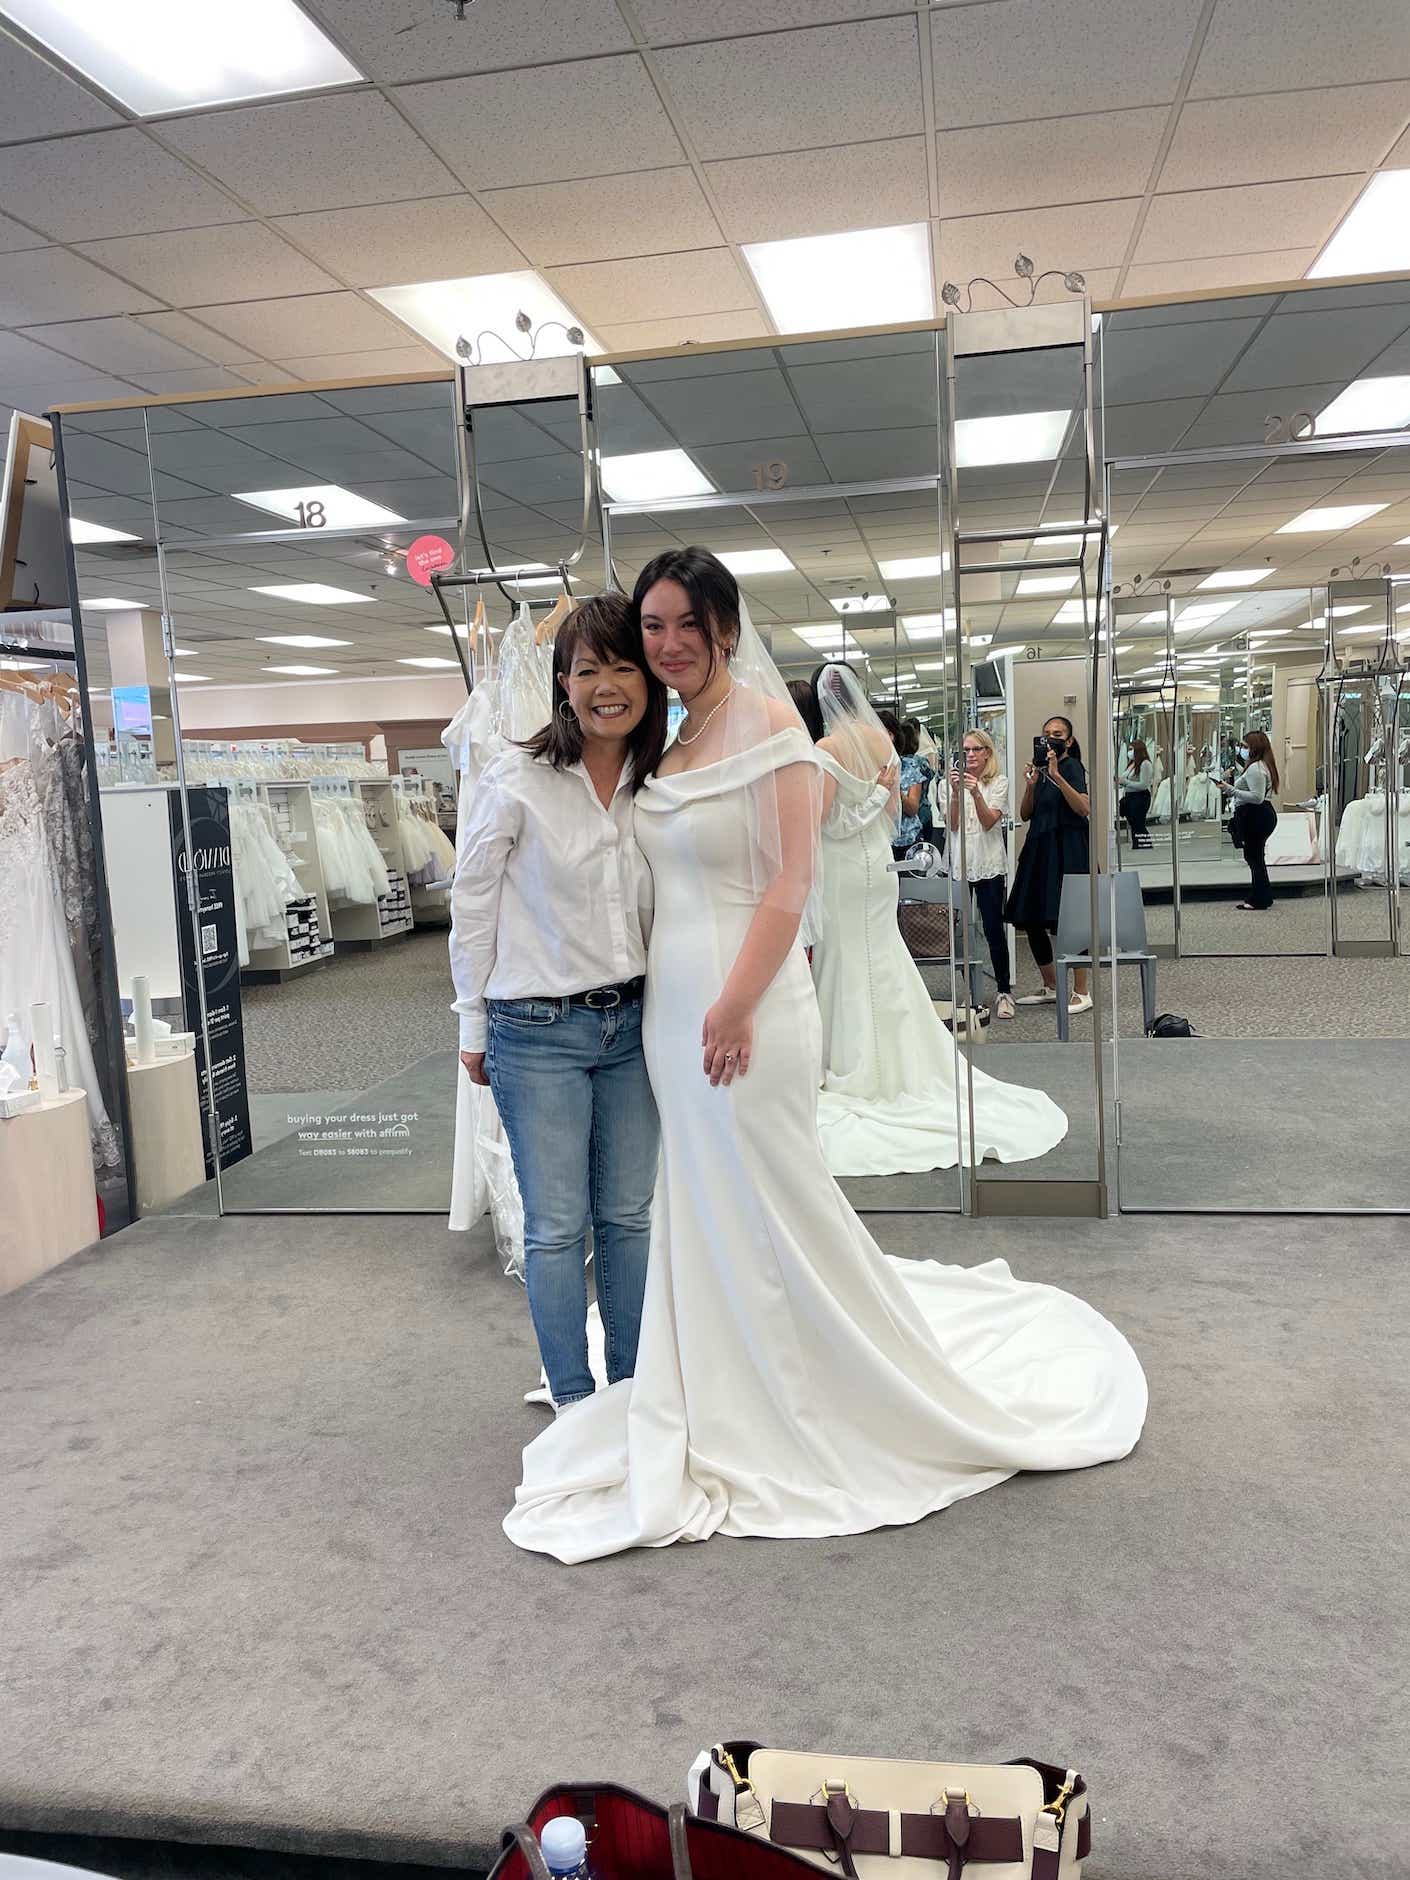 Donna Otis and her daughter wedding dress shopping